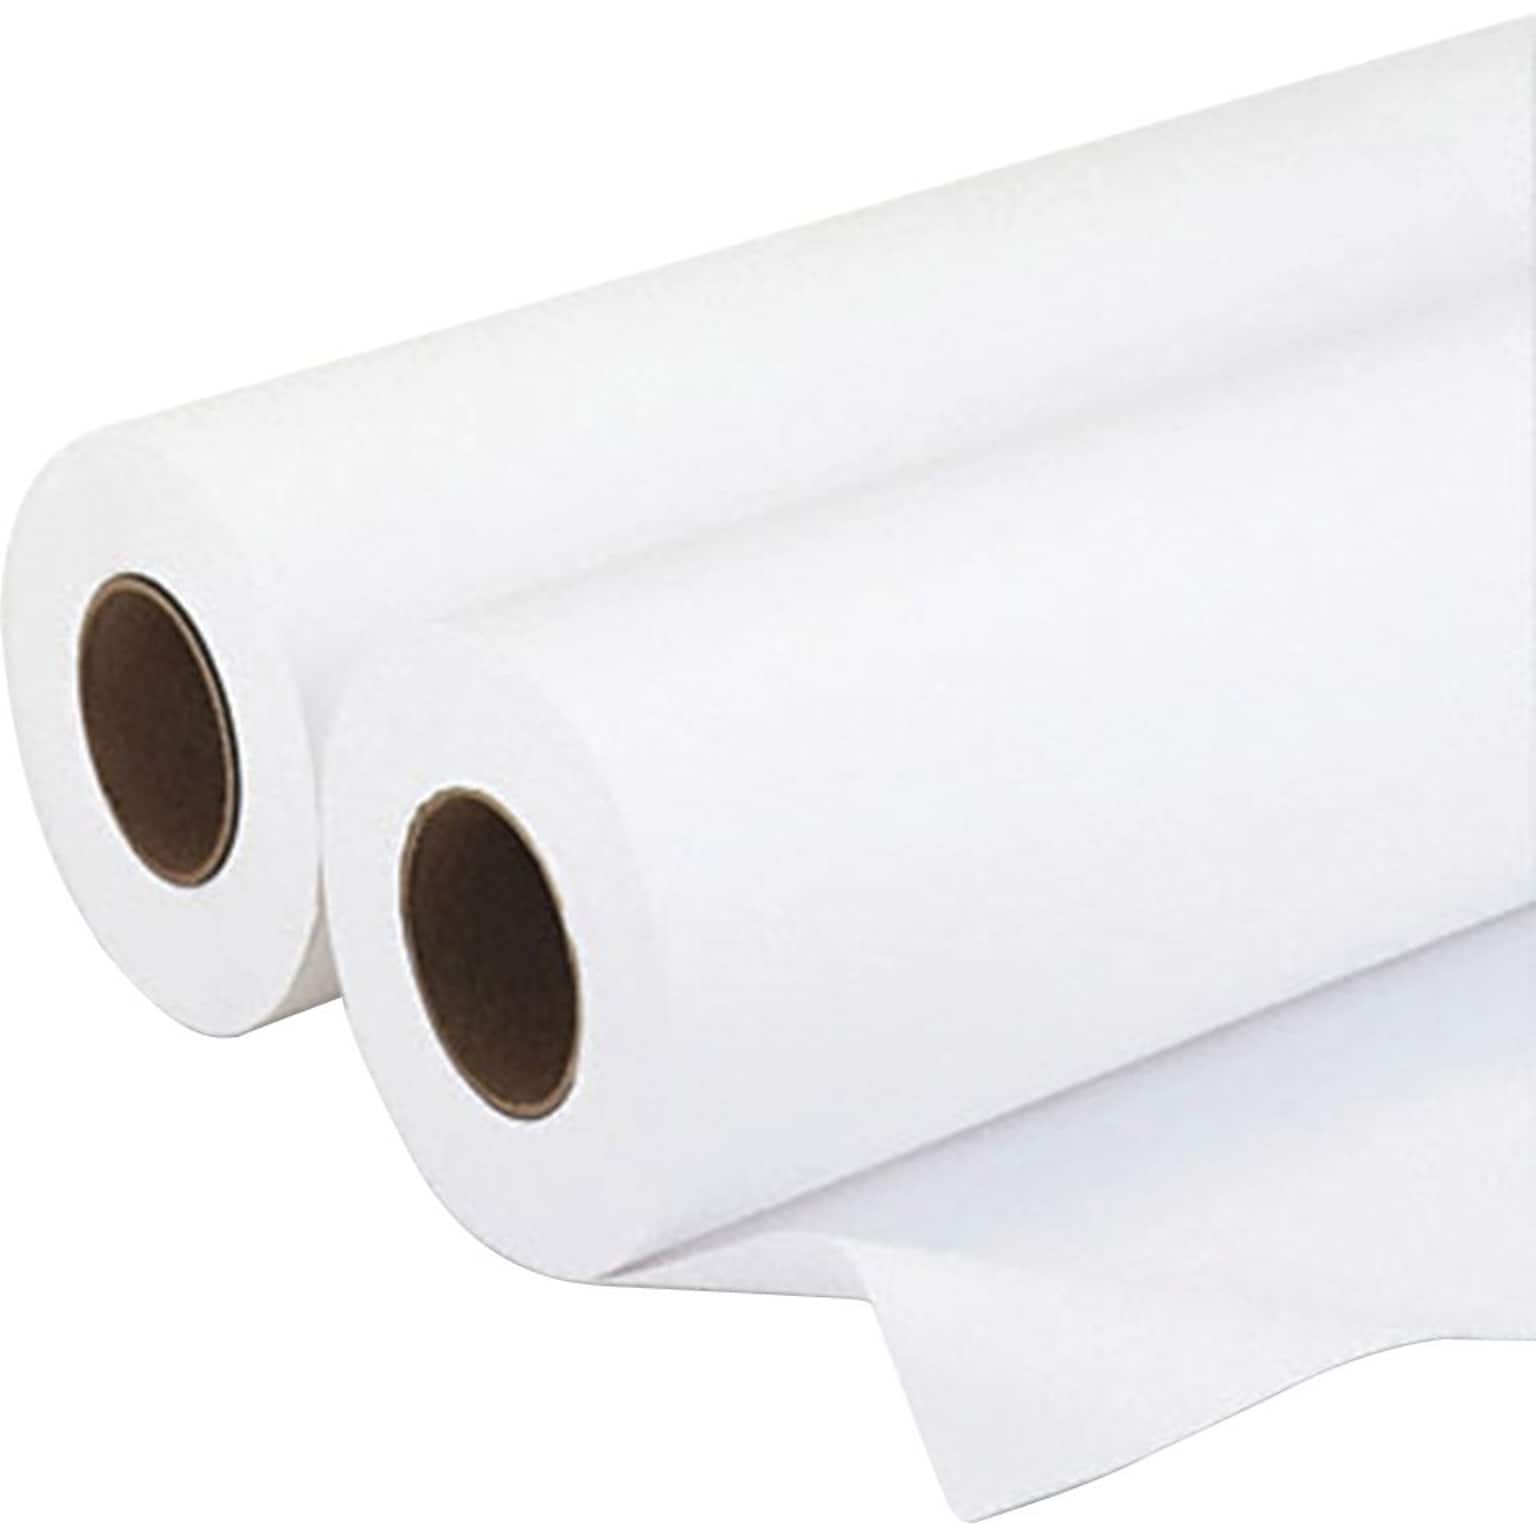 Alliance Table Paper, 40 lb. Bleached White Paper, 24 x 1000, 1 Roll